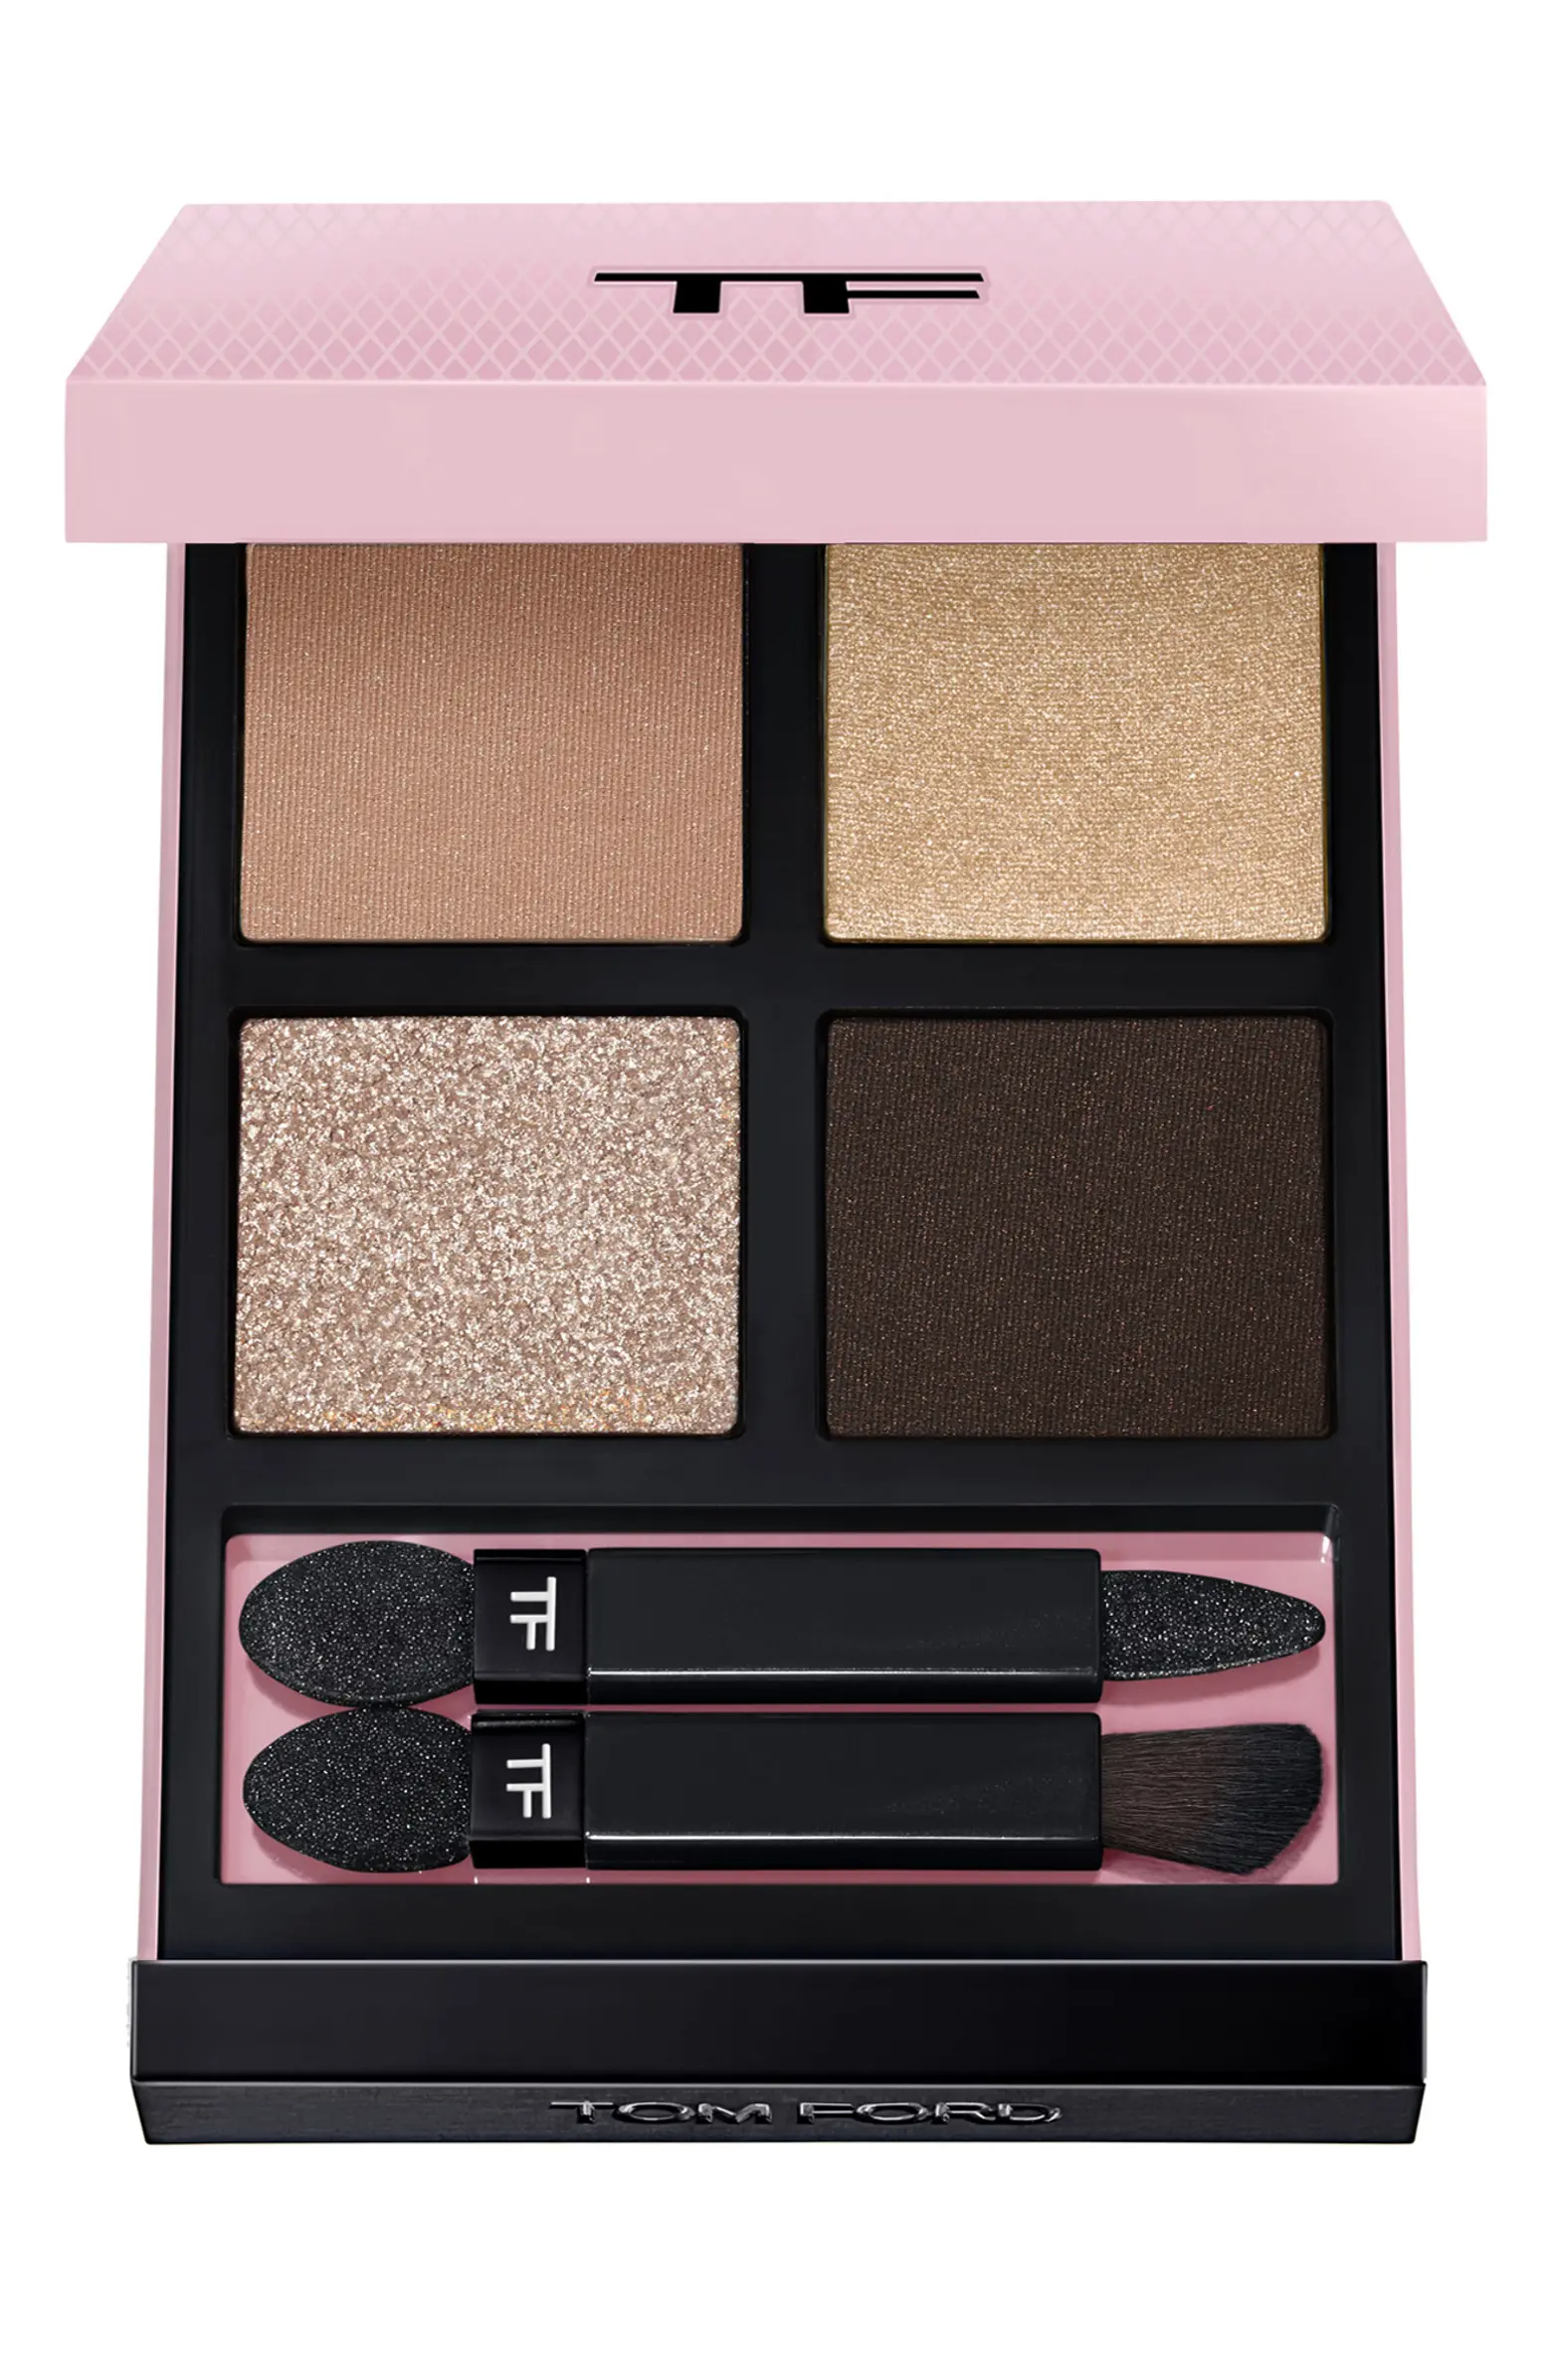 Tom Ford + Eyeshadow Quad in Cocoa Mirage